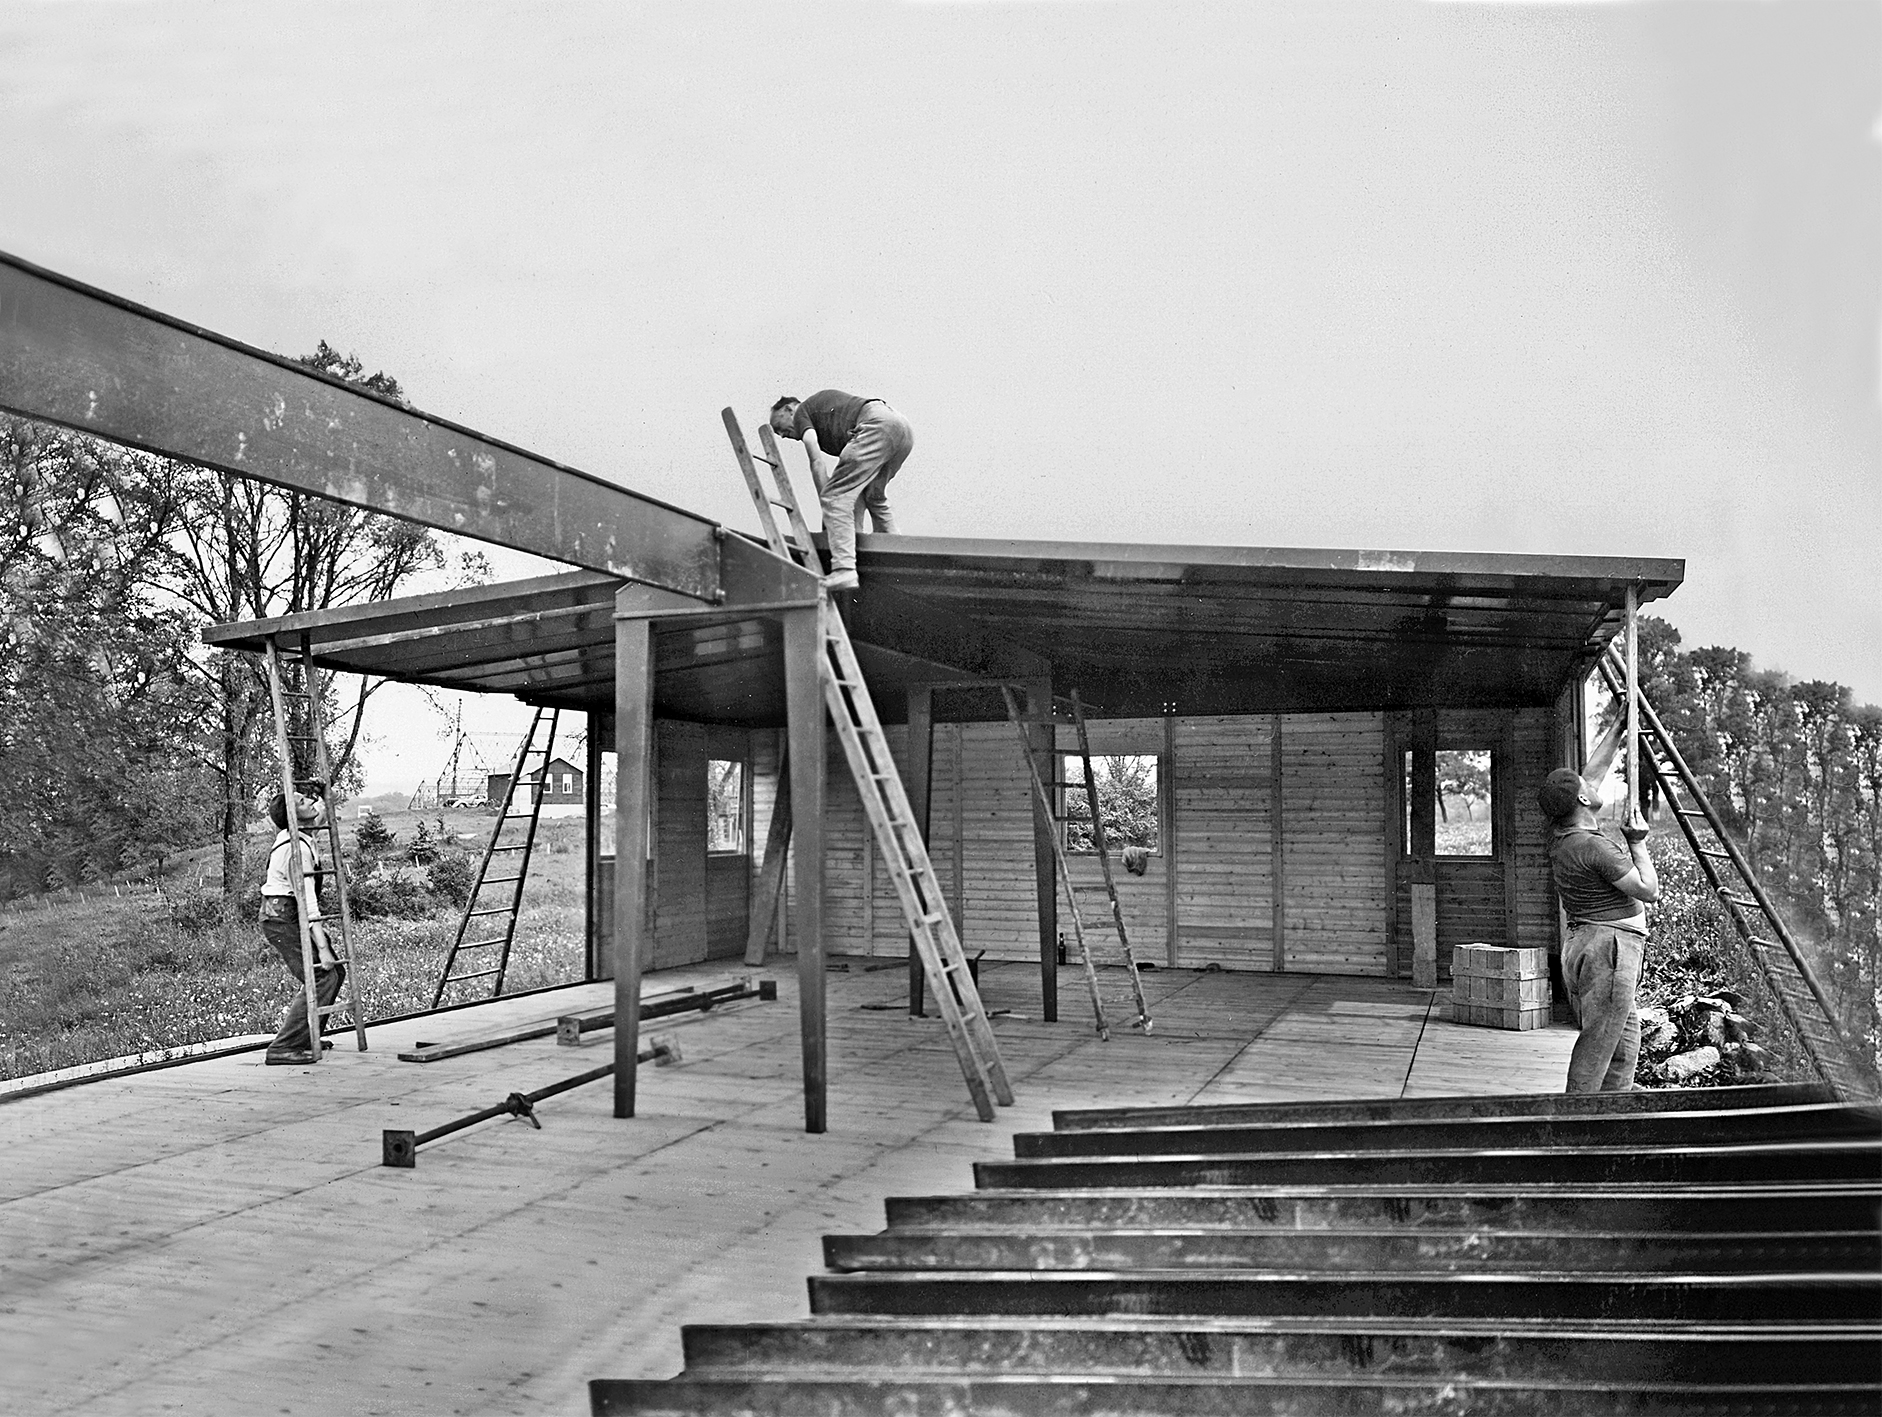 SCAL demountable pavilion. Assembly of one of the engineers’ accommodation buildings, Issoire, May 1940.